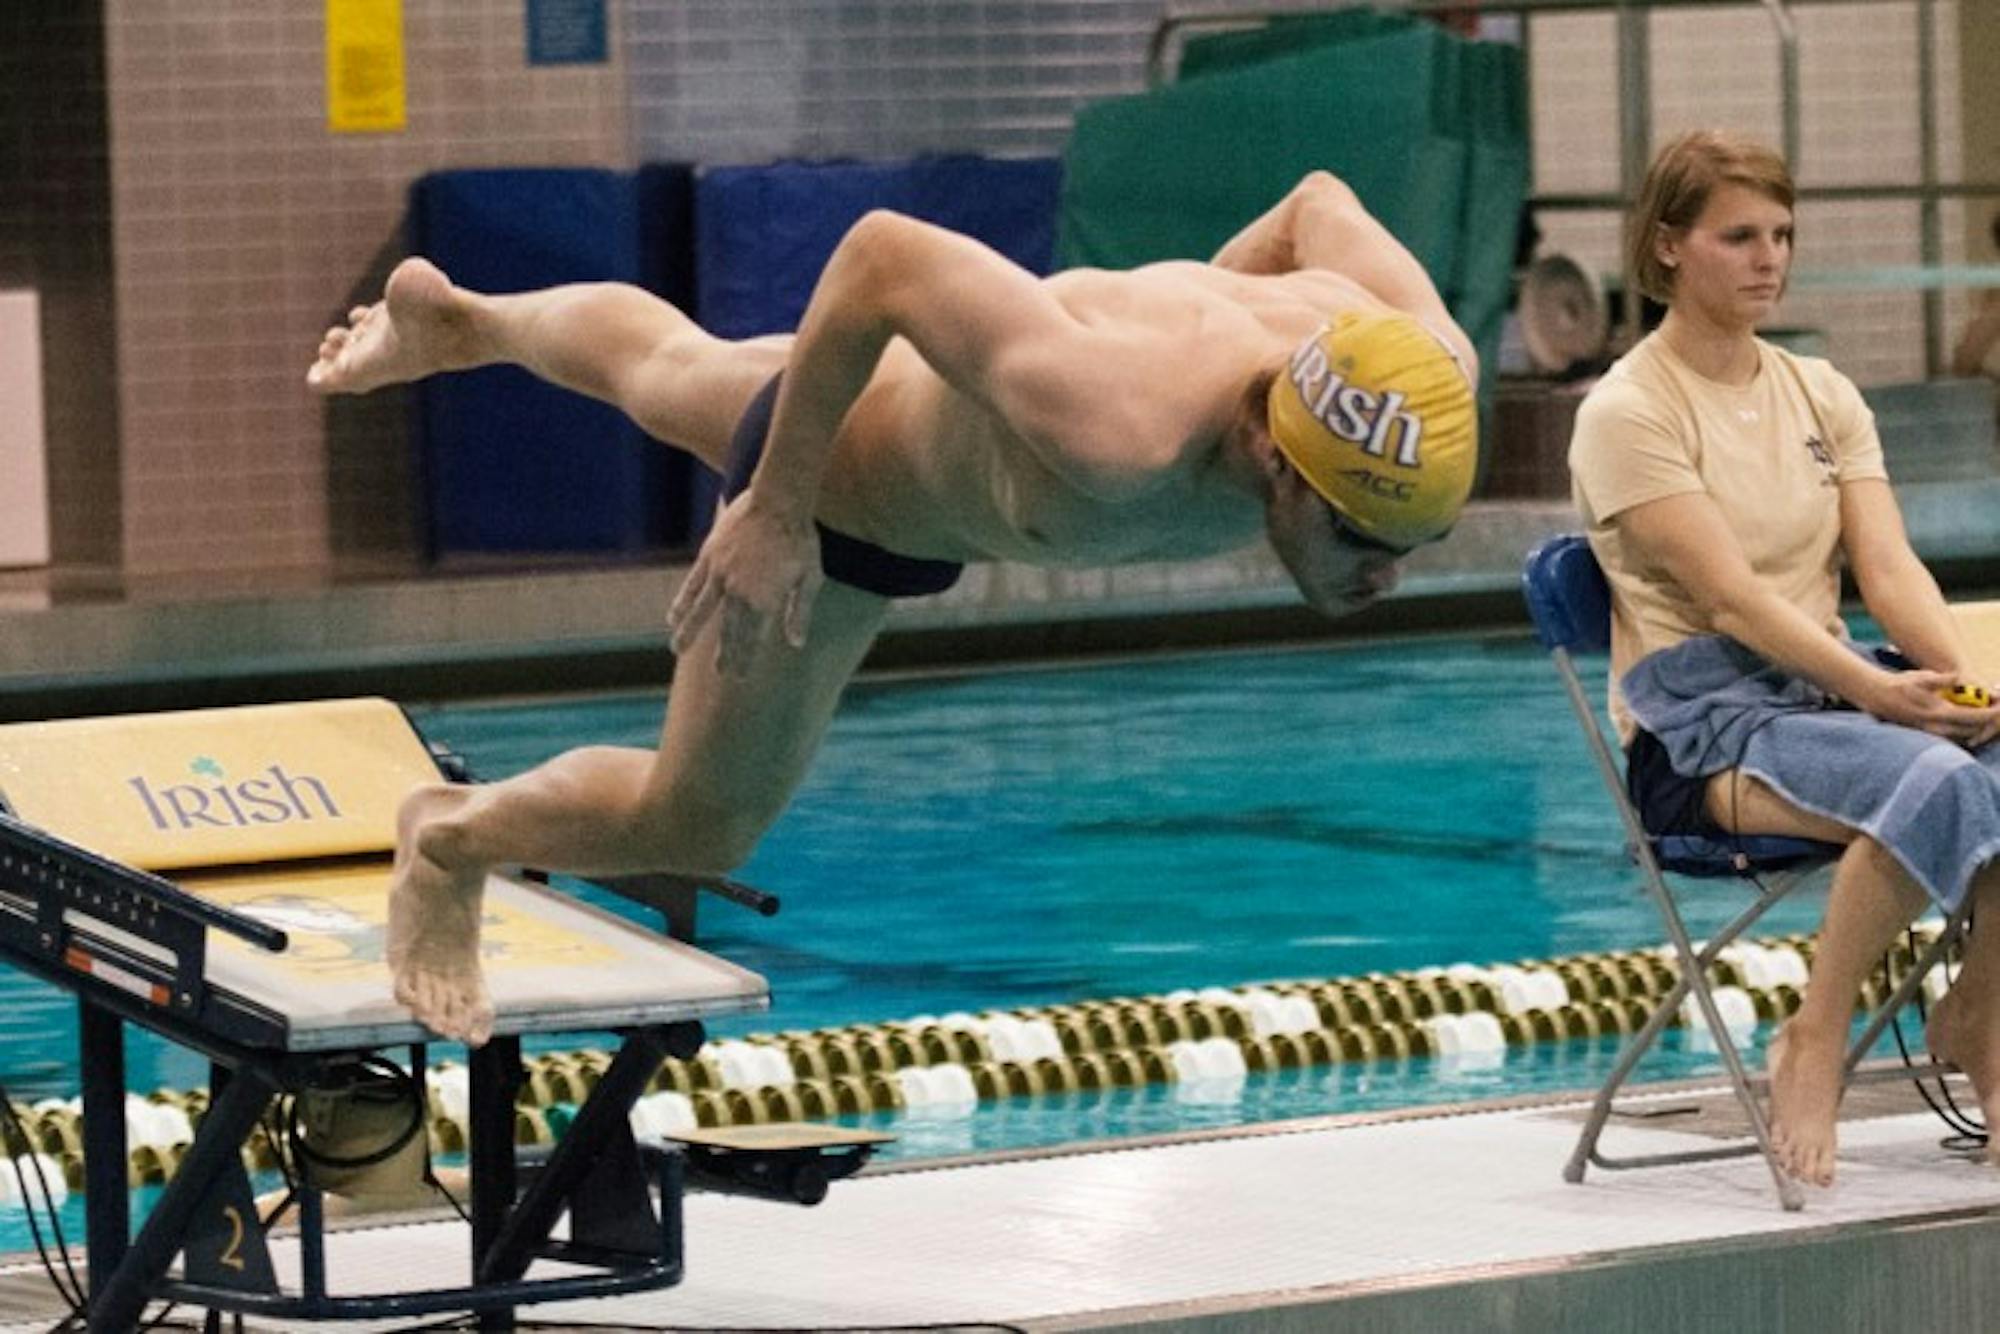 Senior Andrew Jensen dives into the pool at Rolfs Aquatic Center during a meet against Purdue on Nov. 1, 2014. The team hits the road for the first time this season when it travels to Virginia this weekend.